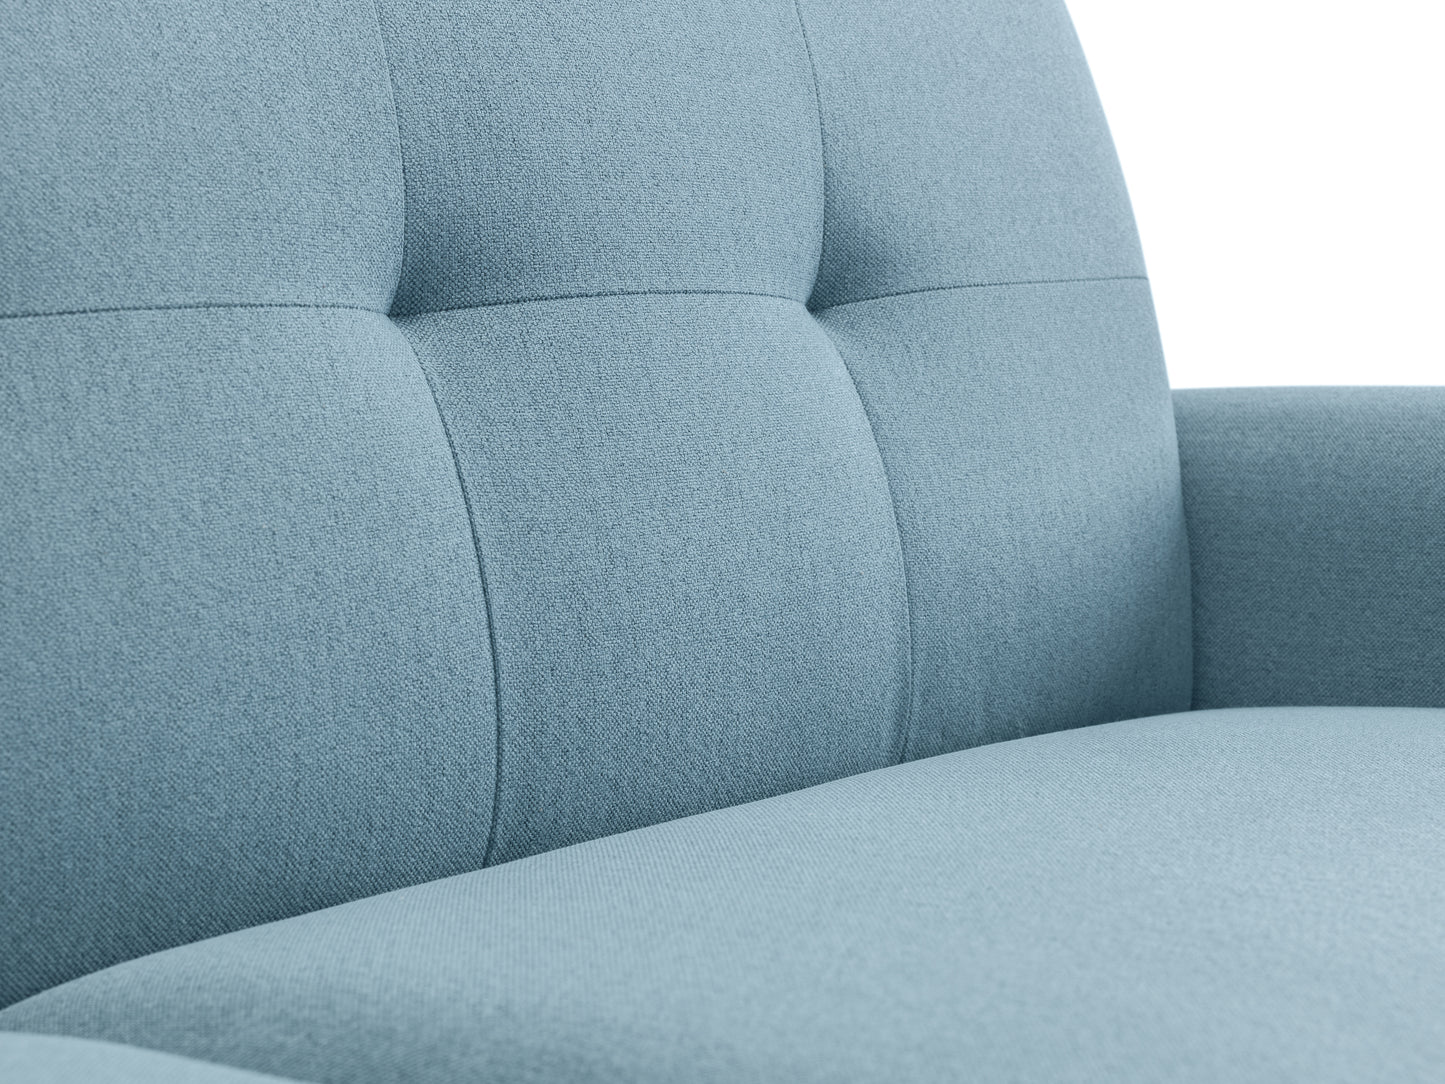 Monza Sofa and Sofa Bed in Blue Fabric